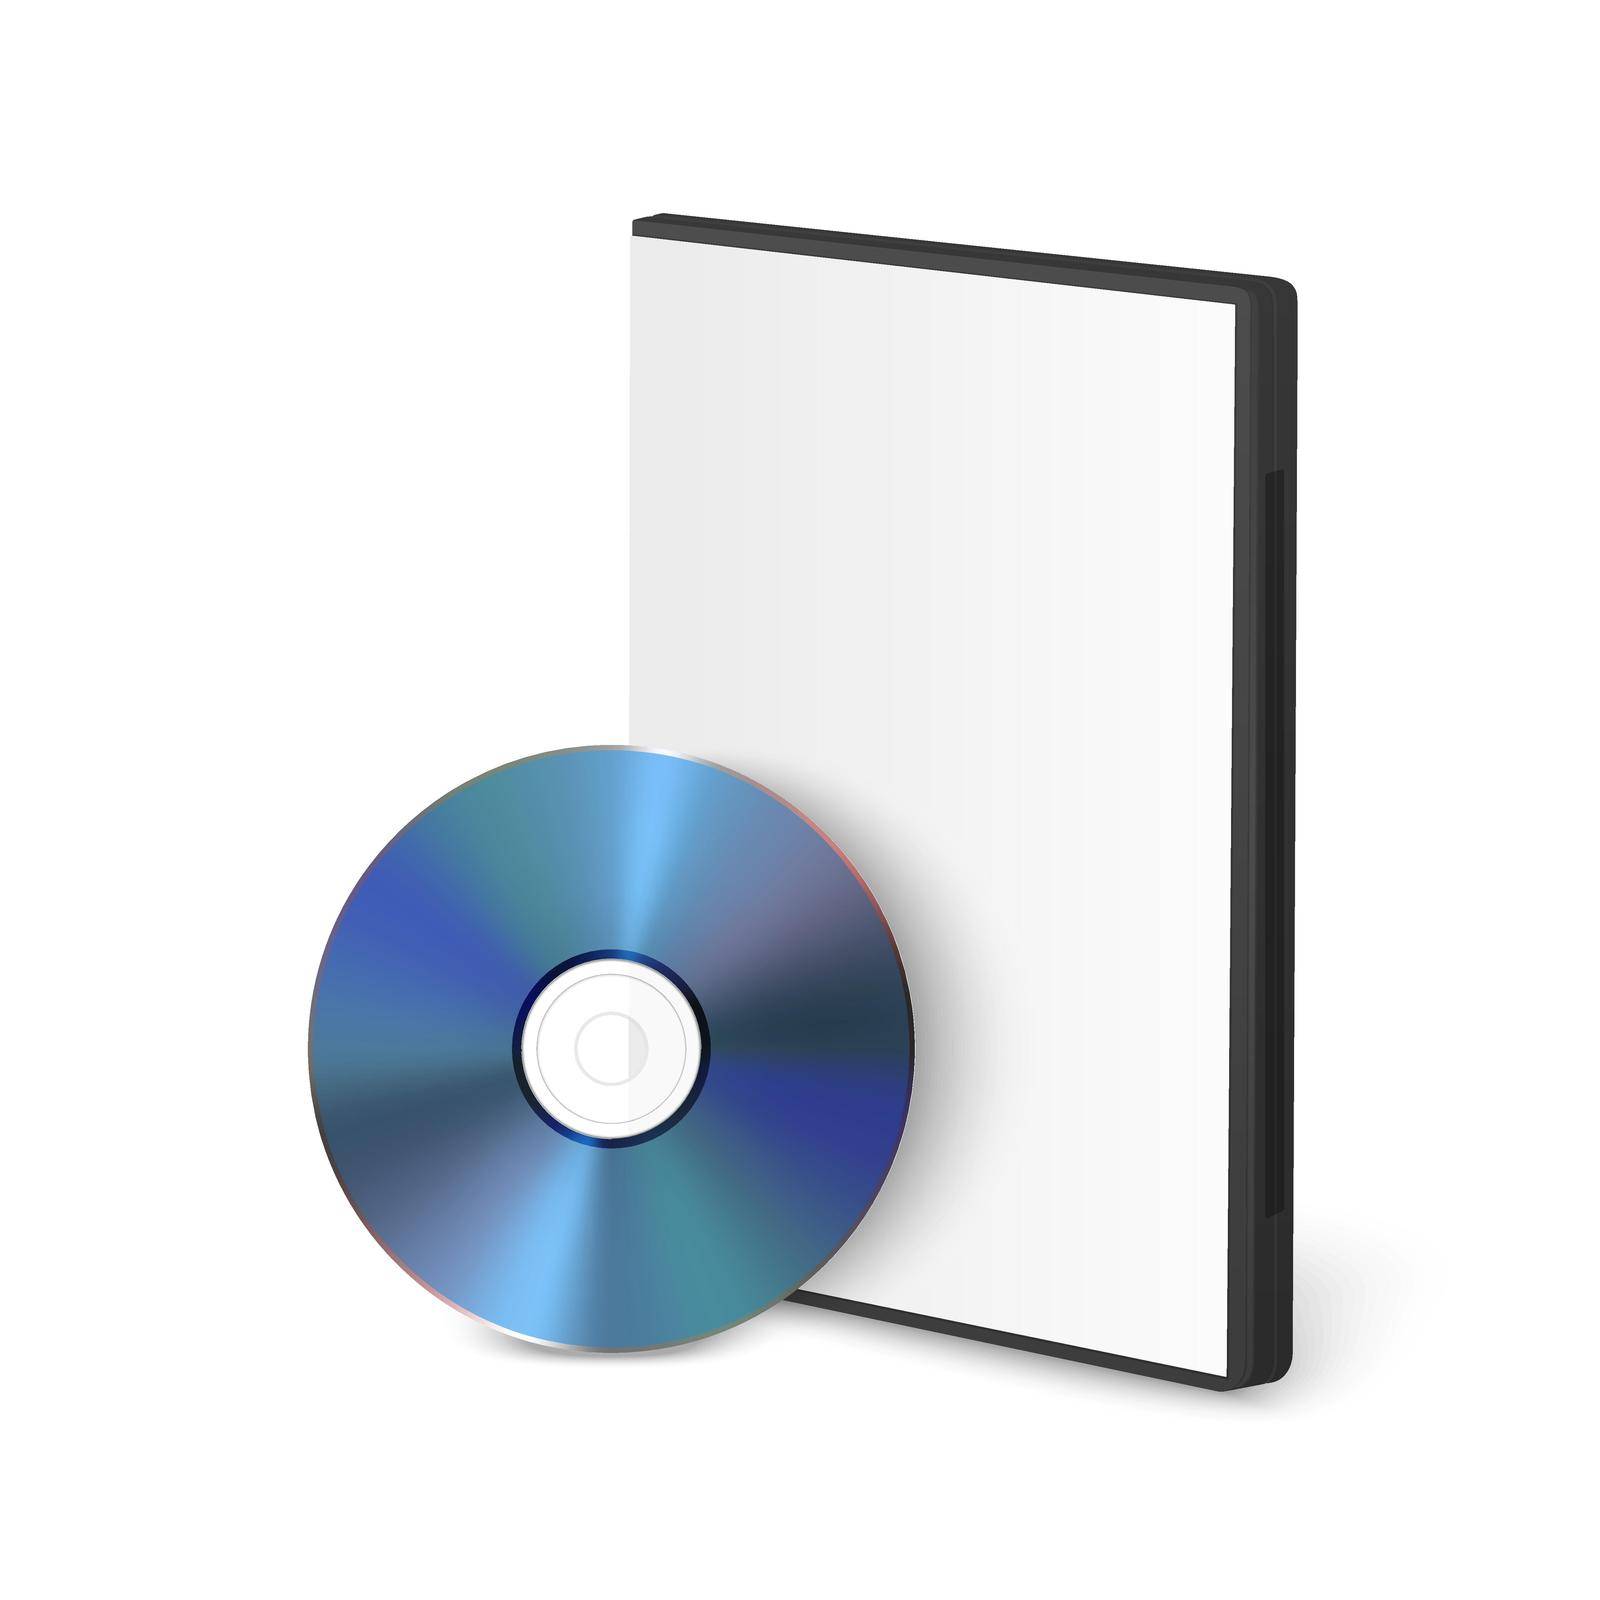 Vector 3d Realistic Blue CD, DVD with Case Isolated on White. CD Box, Packaging Design Template for Mockup. Compact Disk Icon, Front View by Gomolach